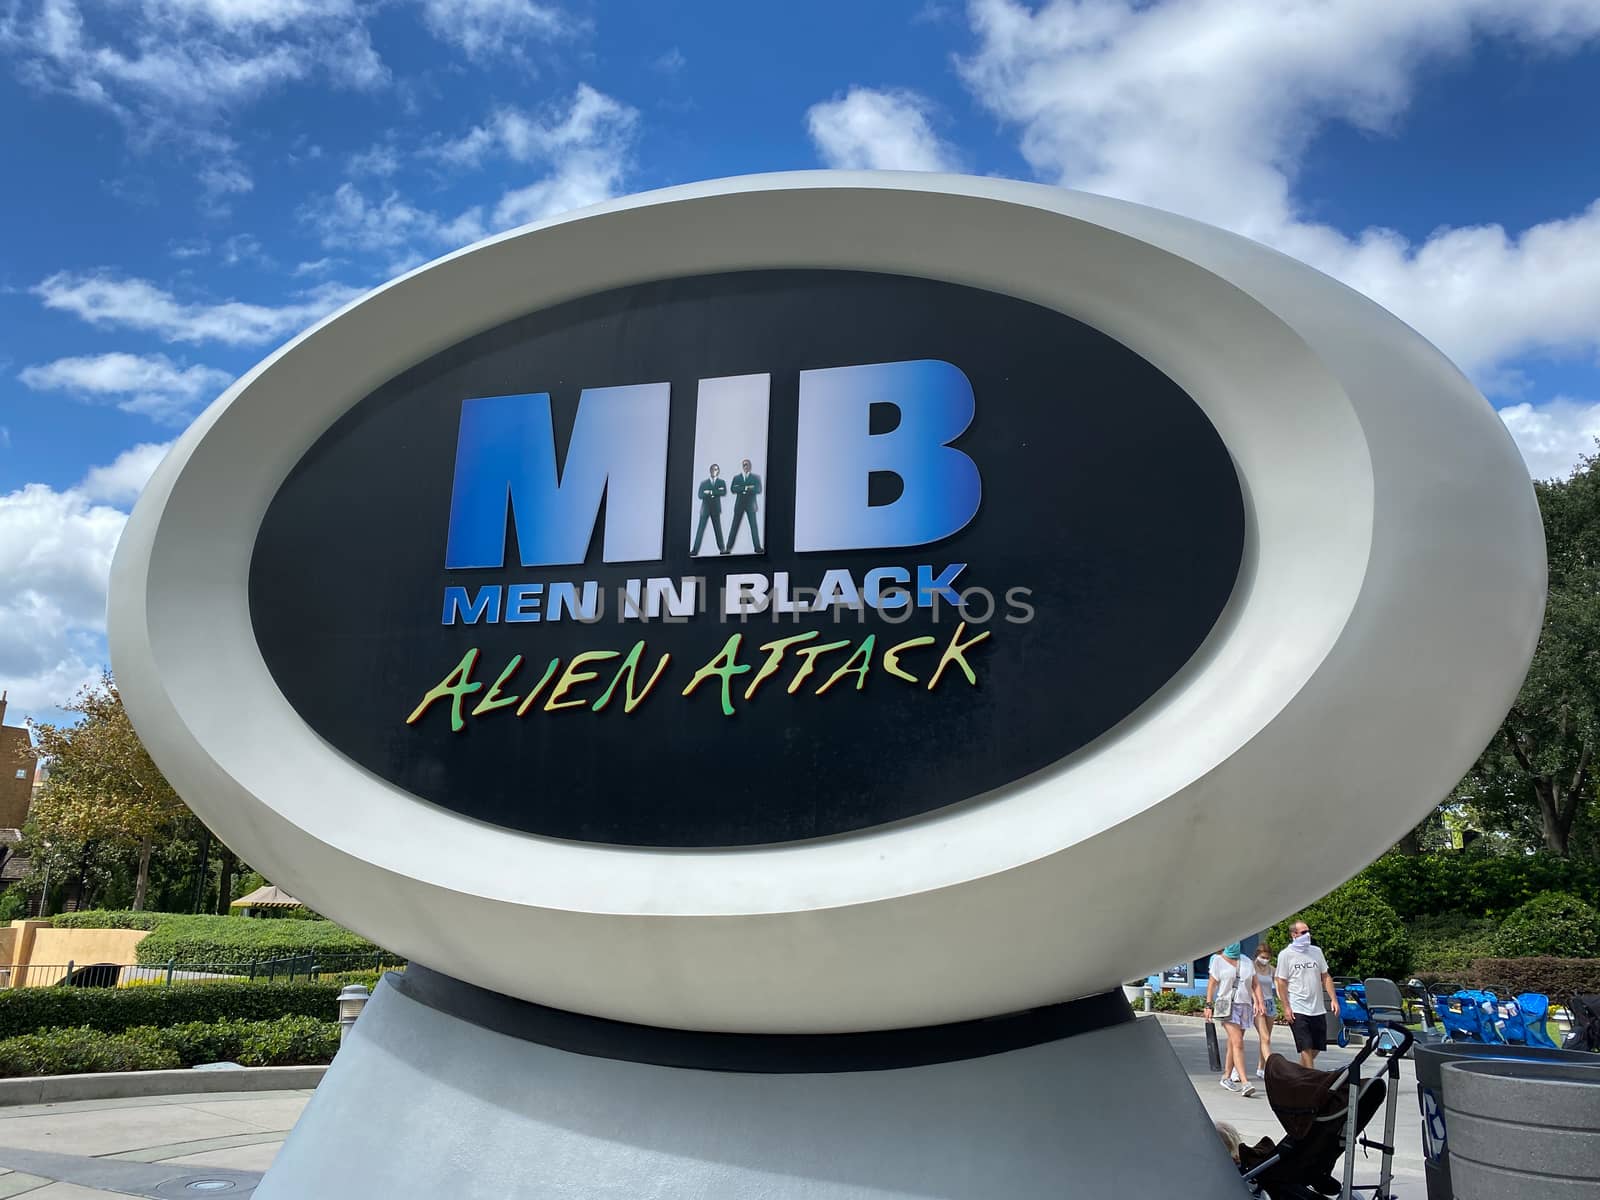 The exterior entance to the Men In Black ride Universal Studios. by Jshanebutt